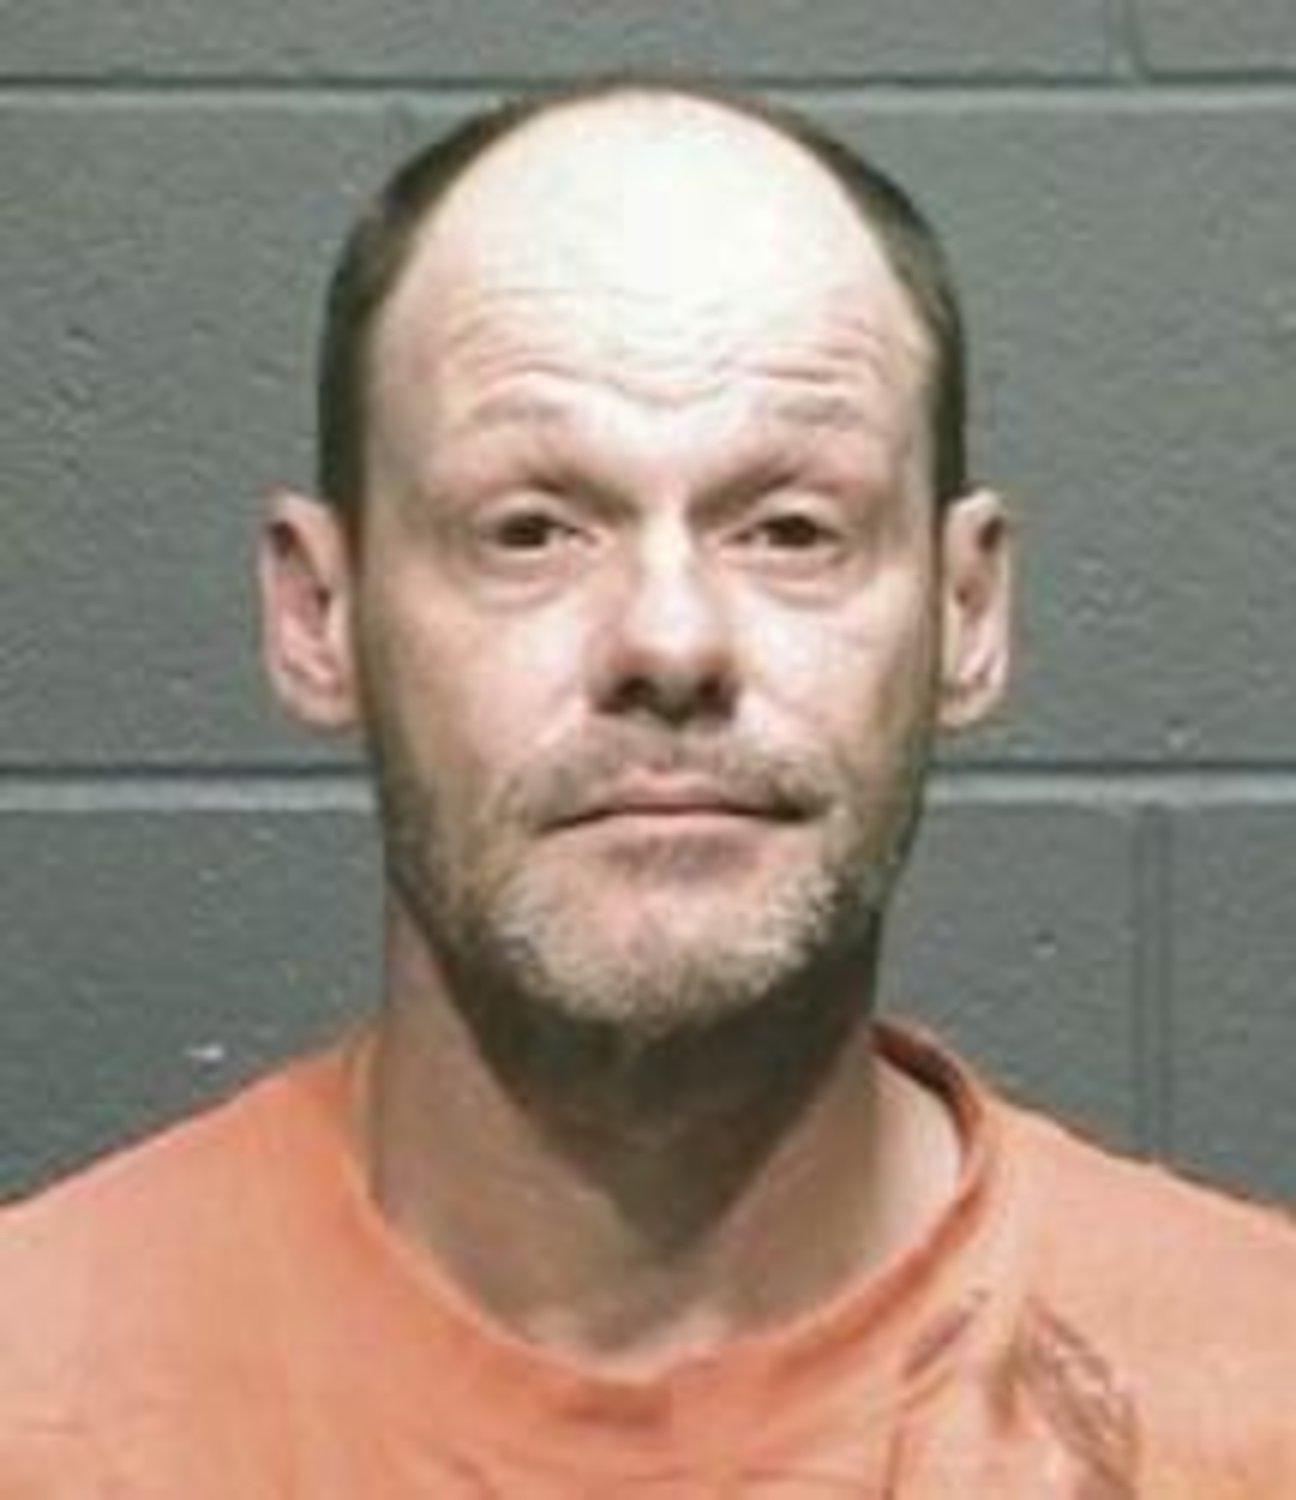 Richard Townley, Jr. was the second person indicted in a April 2012 incident in which two dog were burned.